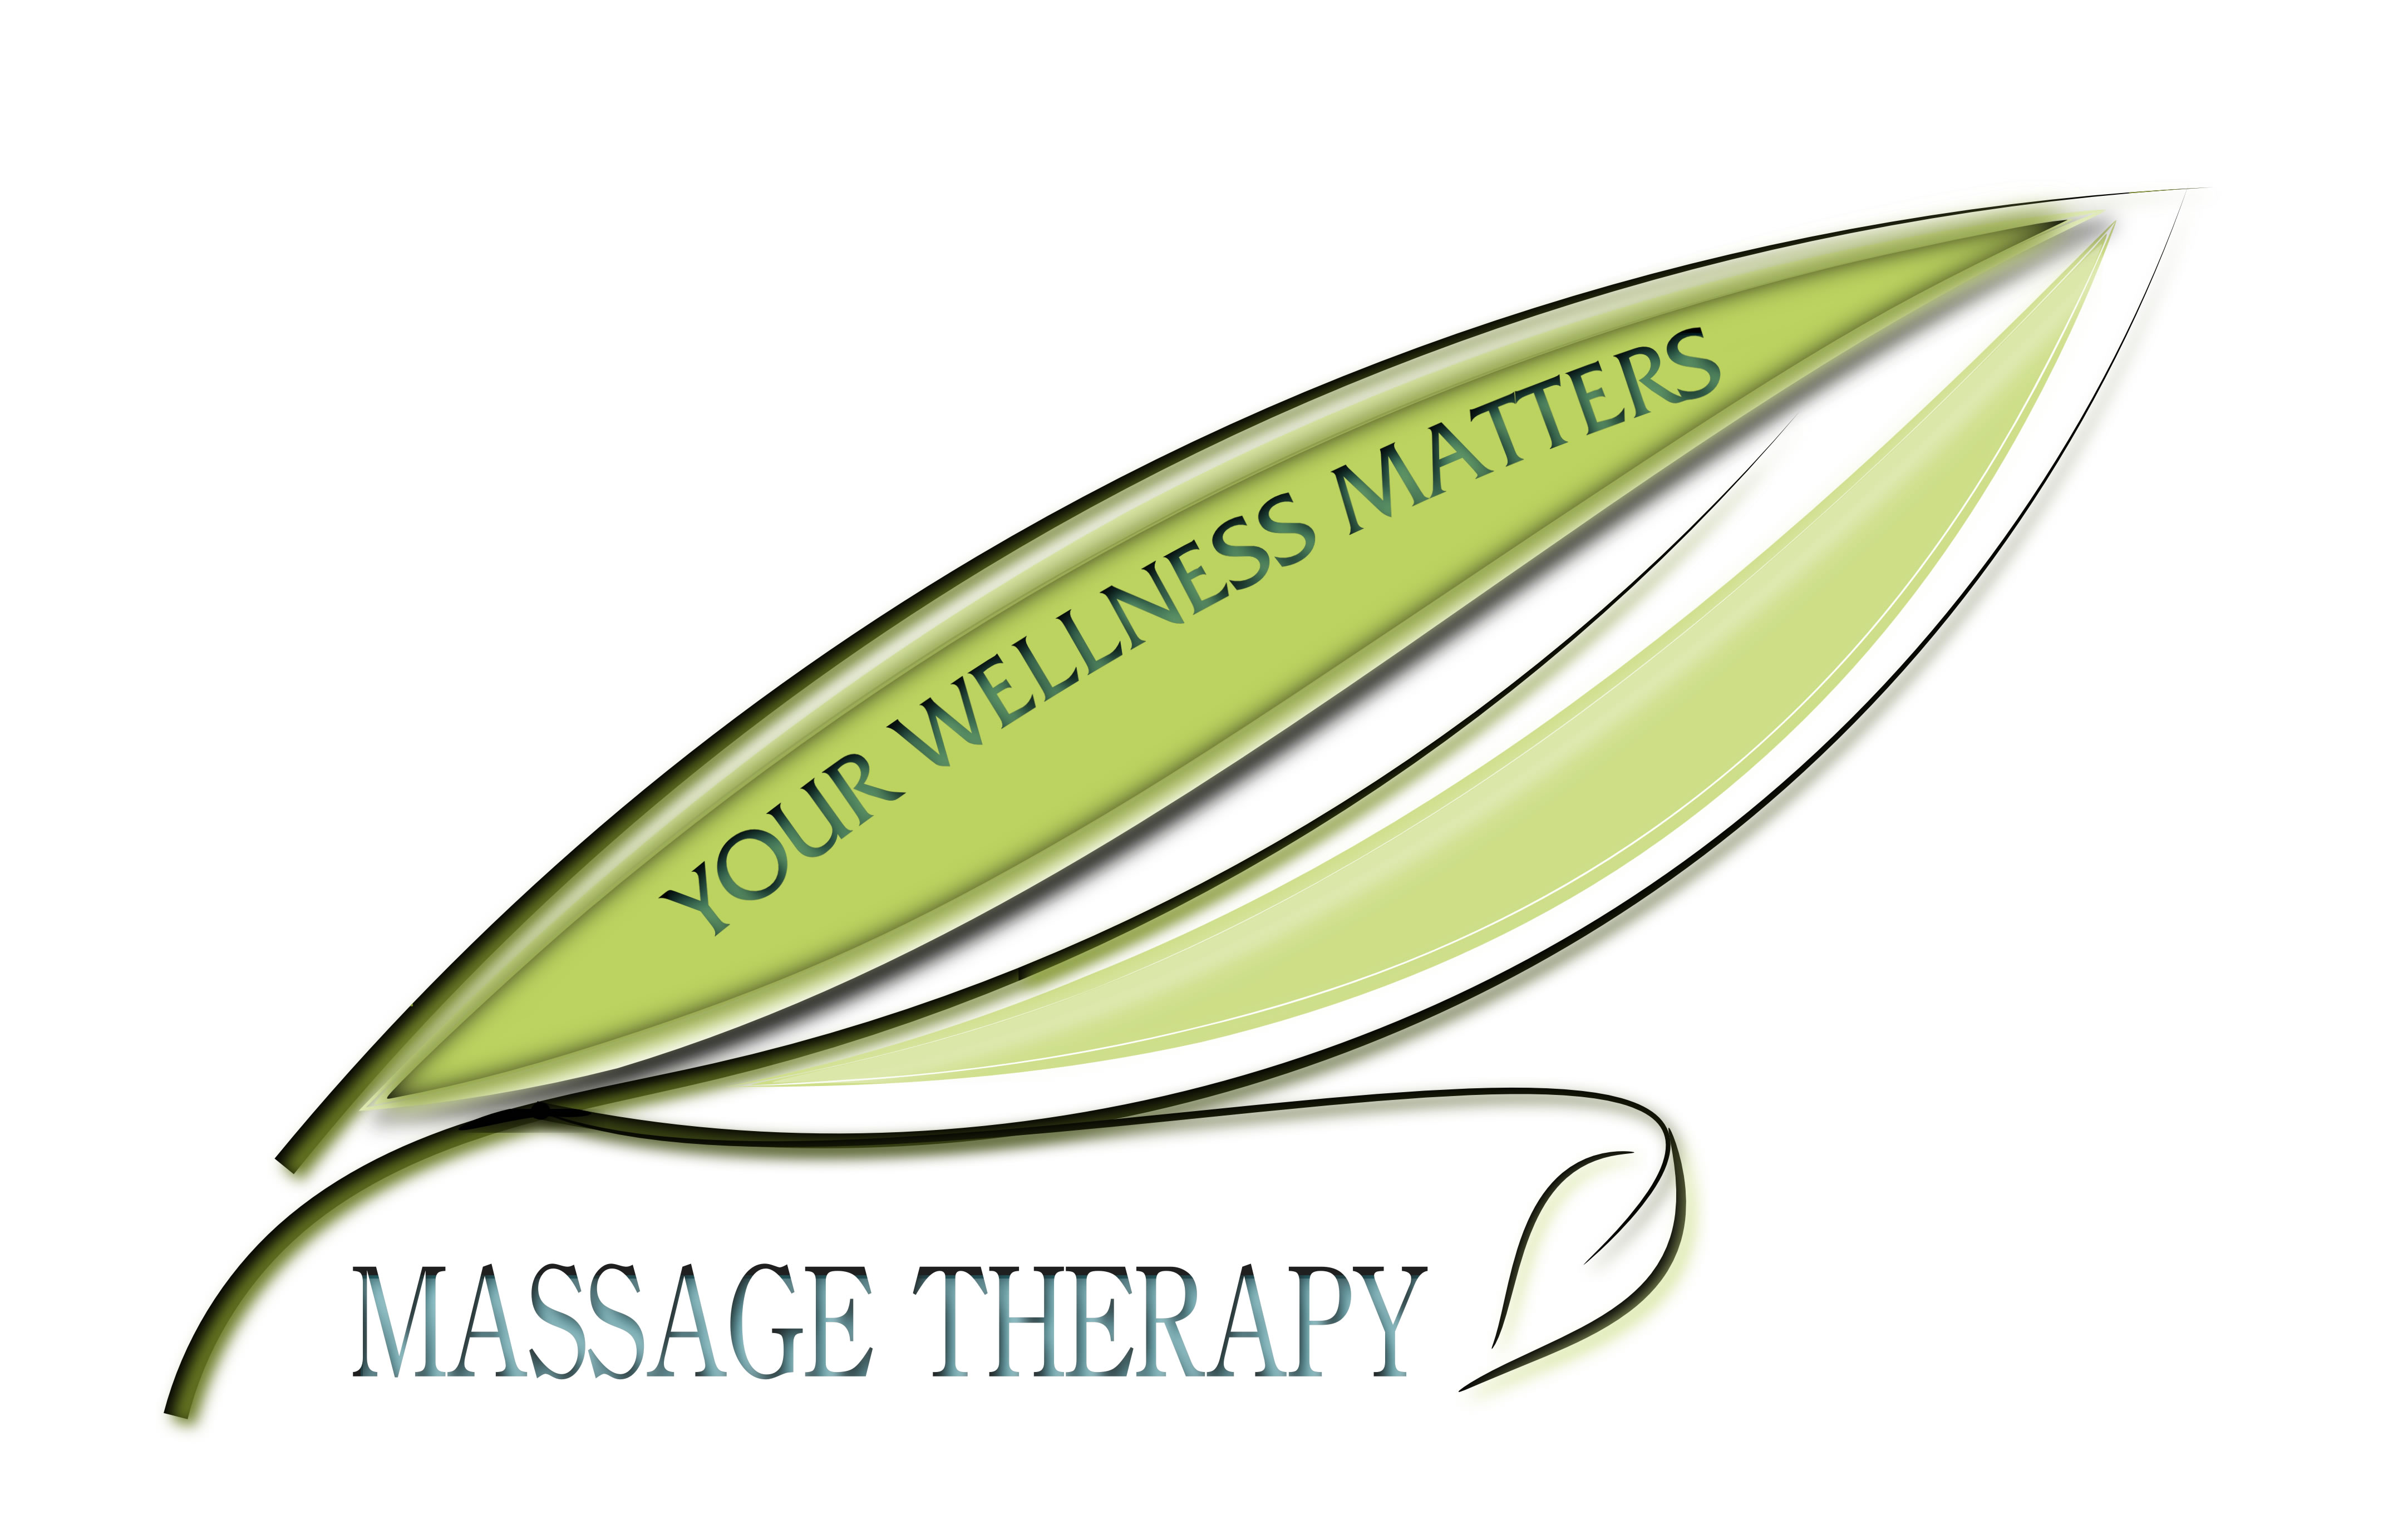 Your Wellness Matters Massage Therapy Clinic